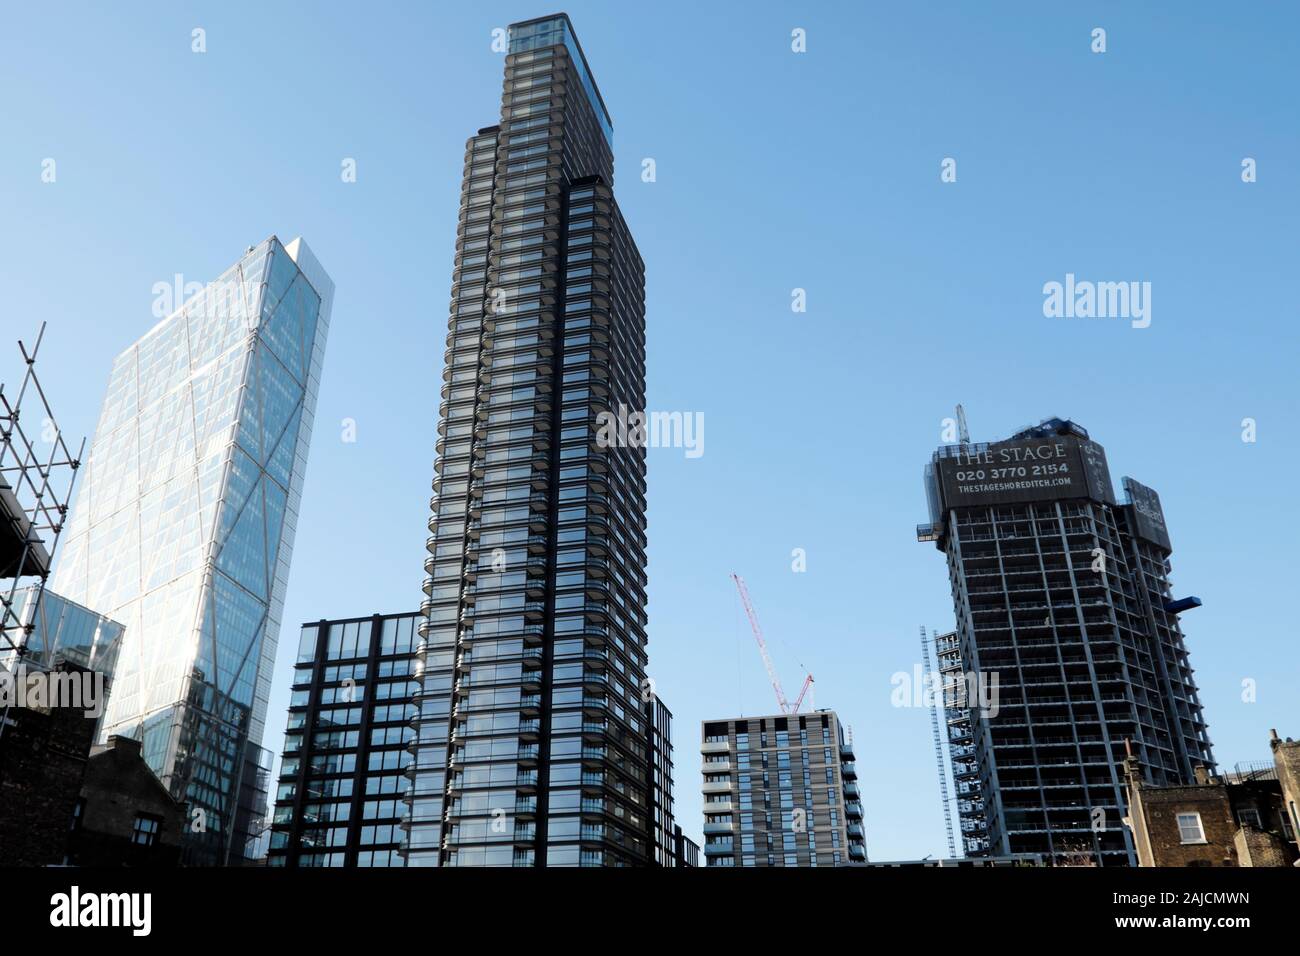 View of new buildings Principal Place and The Stage high rise residential property development from Commercial Street in East London E1  KATHY DEWITT Stock Photo